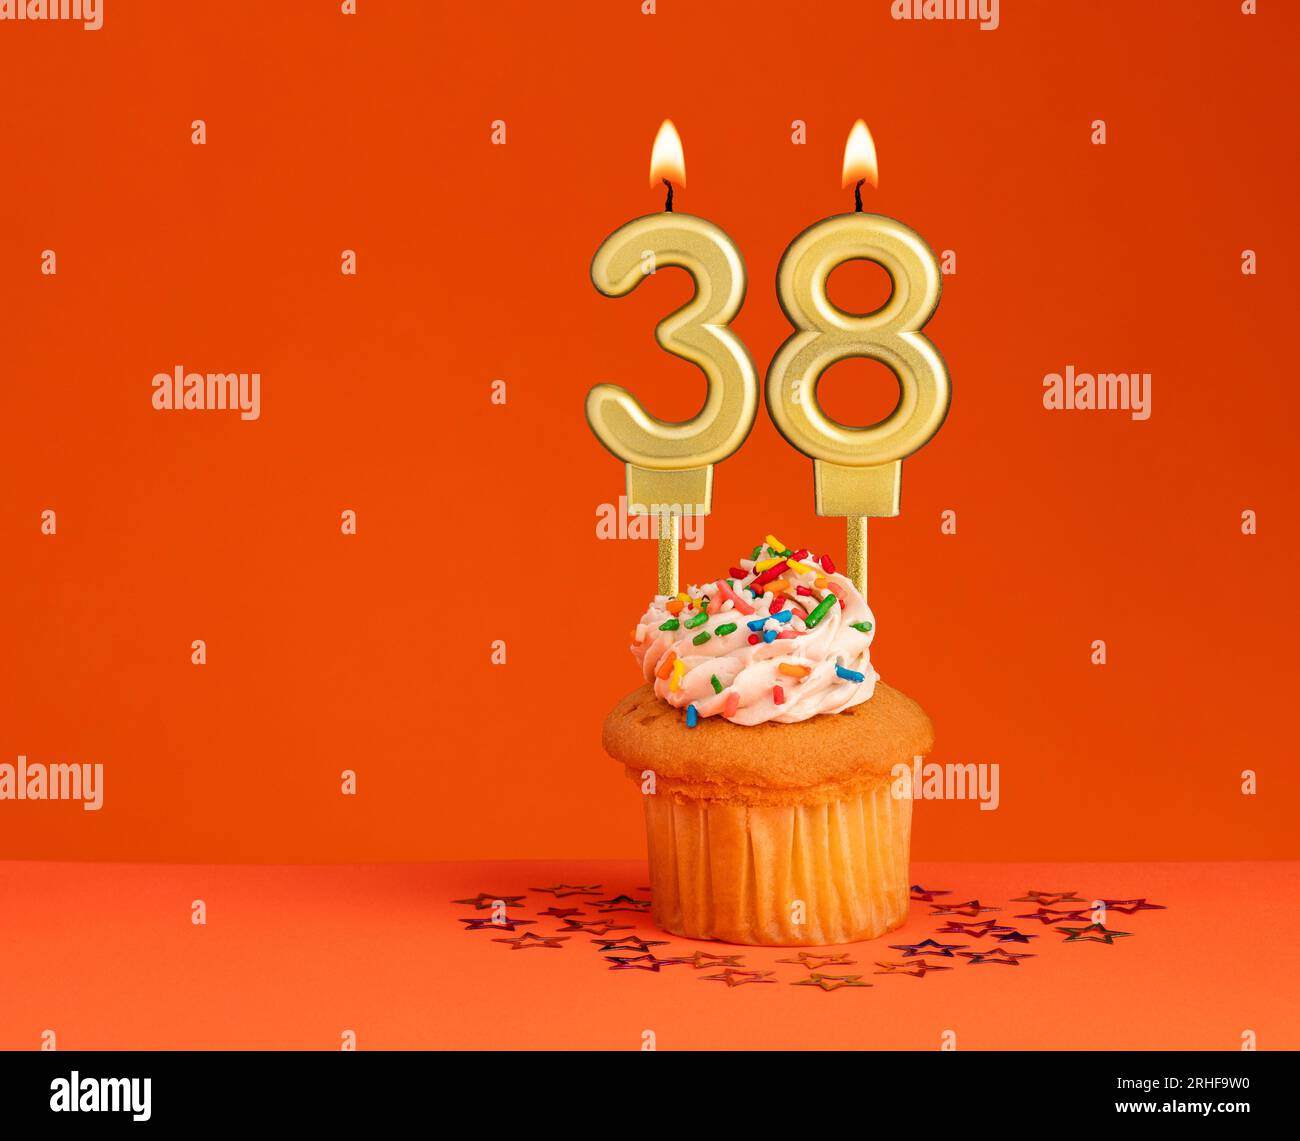 Birthday candle number 38 - Invitation card with orange background ...